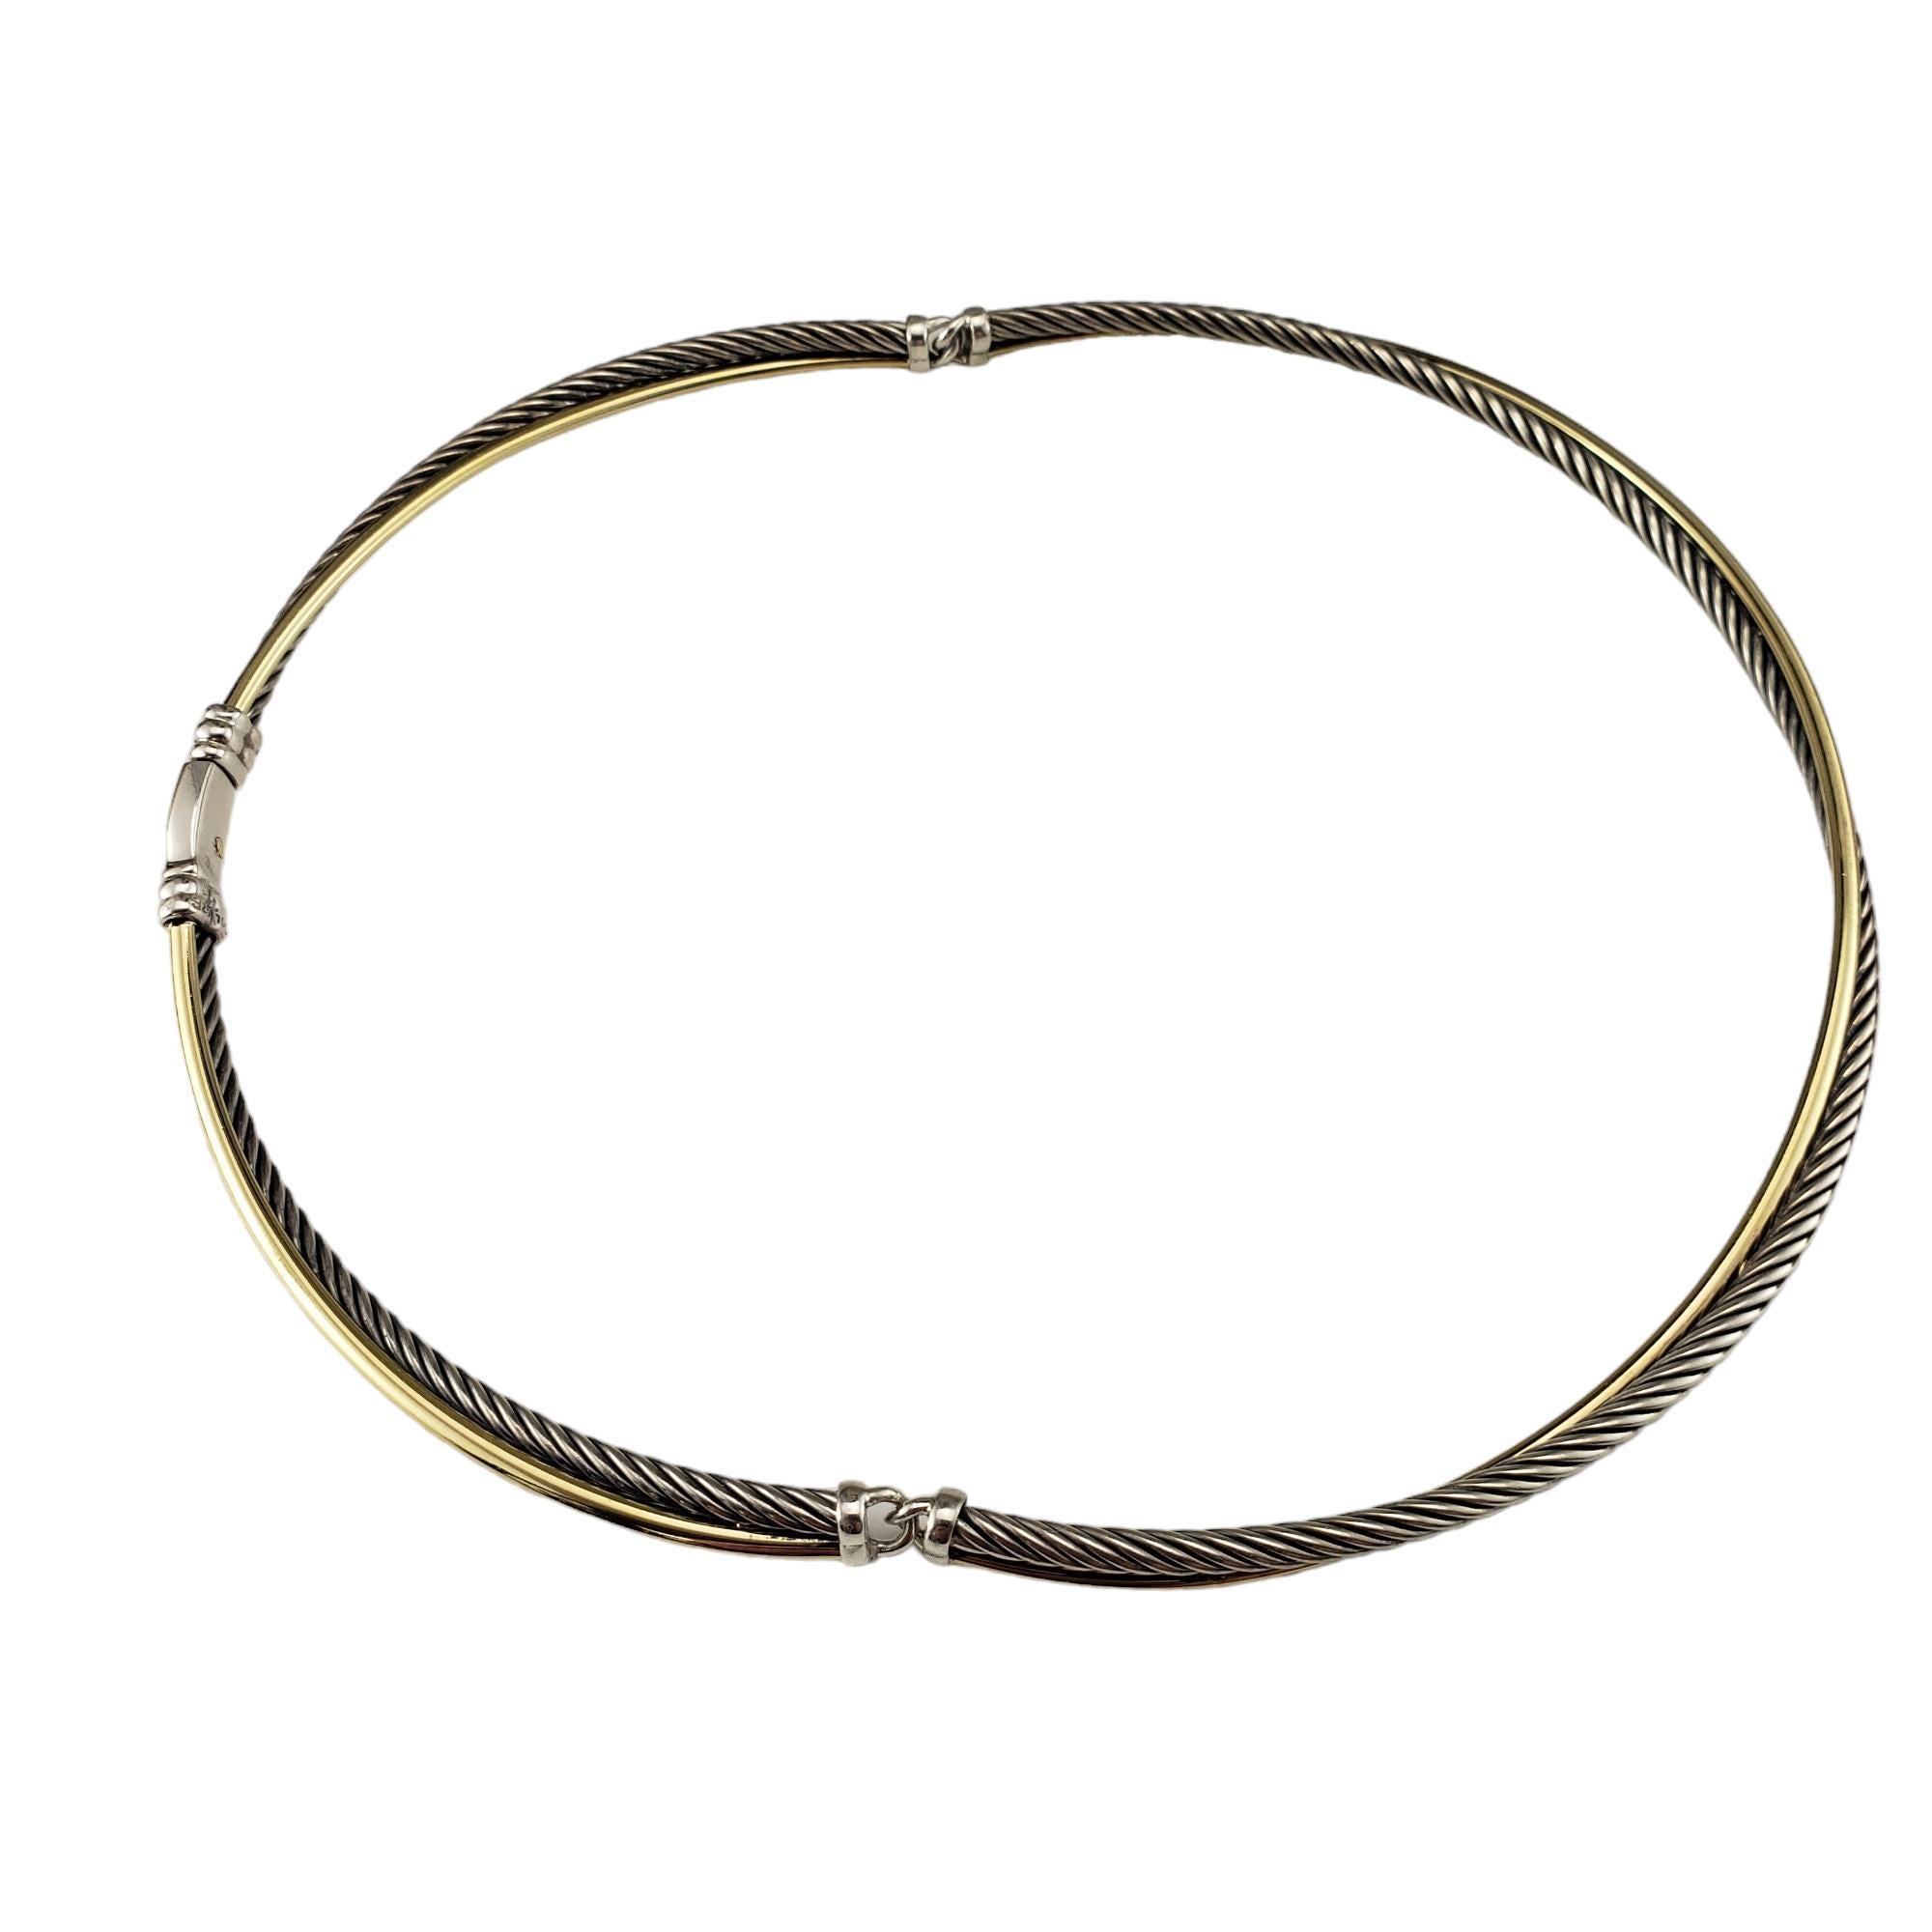 David Yurman Sterling Silver and 18K Yellow Gold Choker Necklace-

This elegant choker necklace by David Yurman is crafted in meticulously detailed sterling silver and 18K yellow gold.  Width: 4.6 mm.

Size: 16 inches

Hallmark: 925  750 